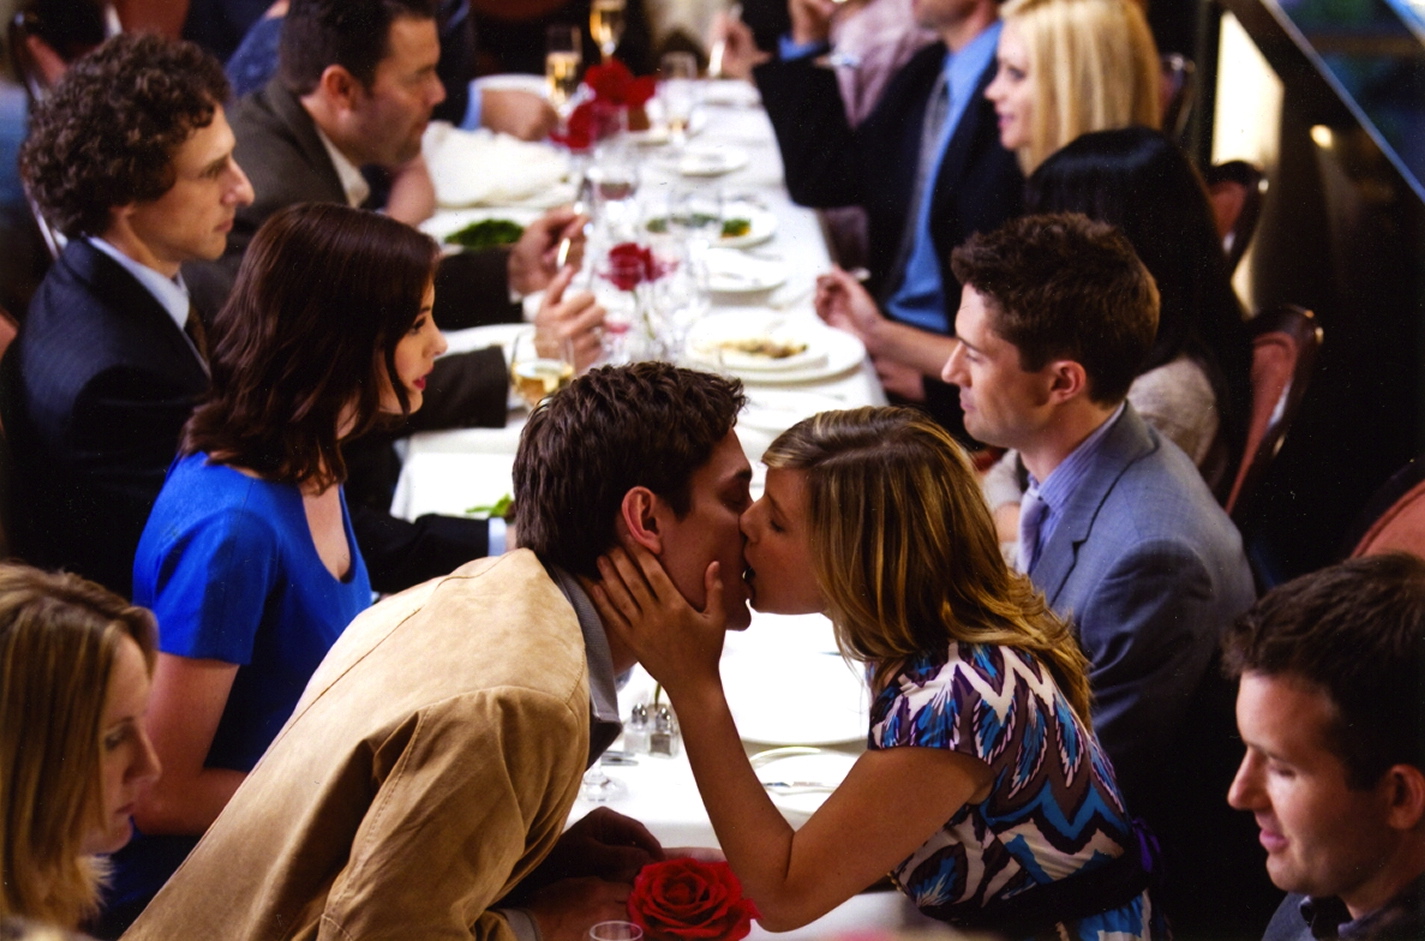 Greg Wilson, Emily Moss Wilson, Anne Hathaway, and Topher Grace in Valentine's Day